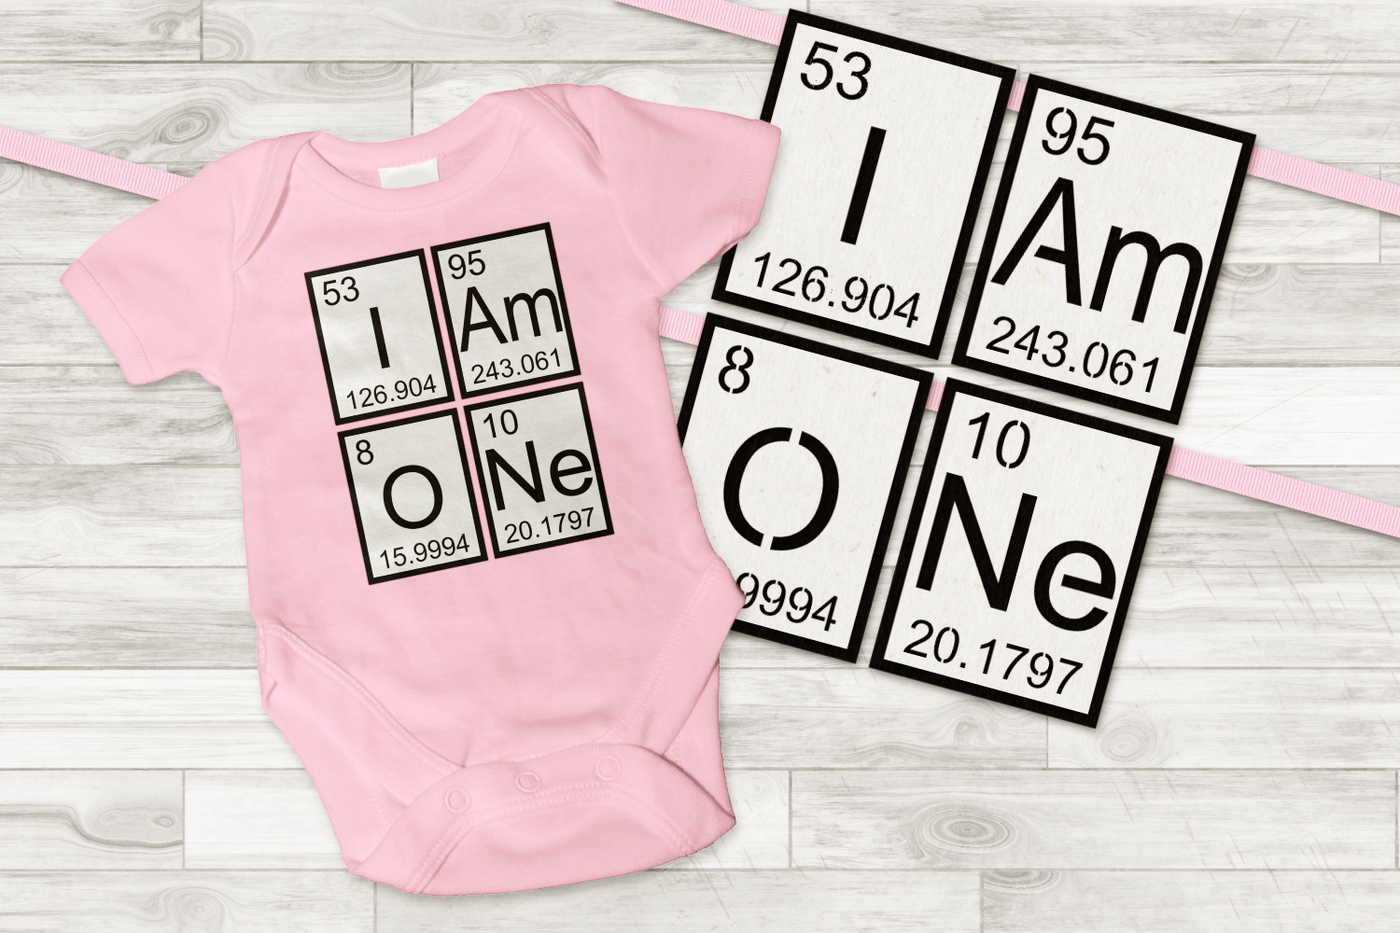 A pink baby onesie that says "I Am ONe" made out of periodic elements. The same periodic elements are used to make a banner.